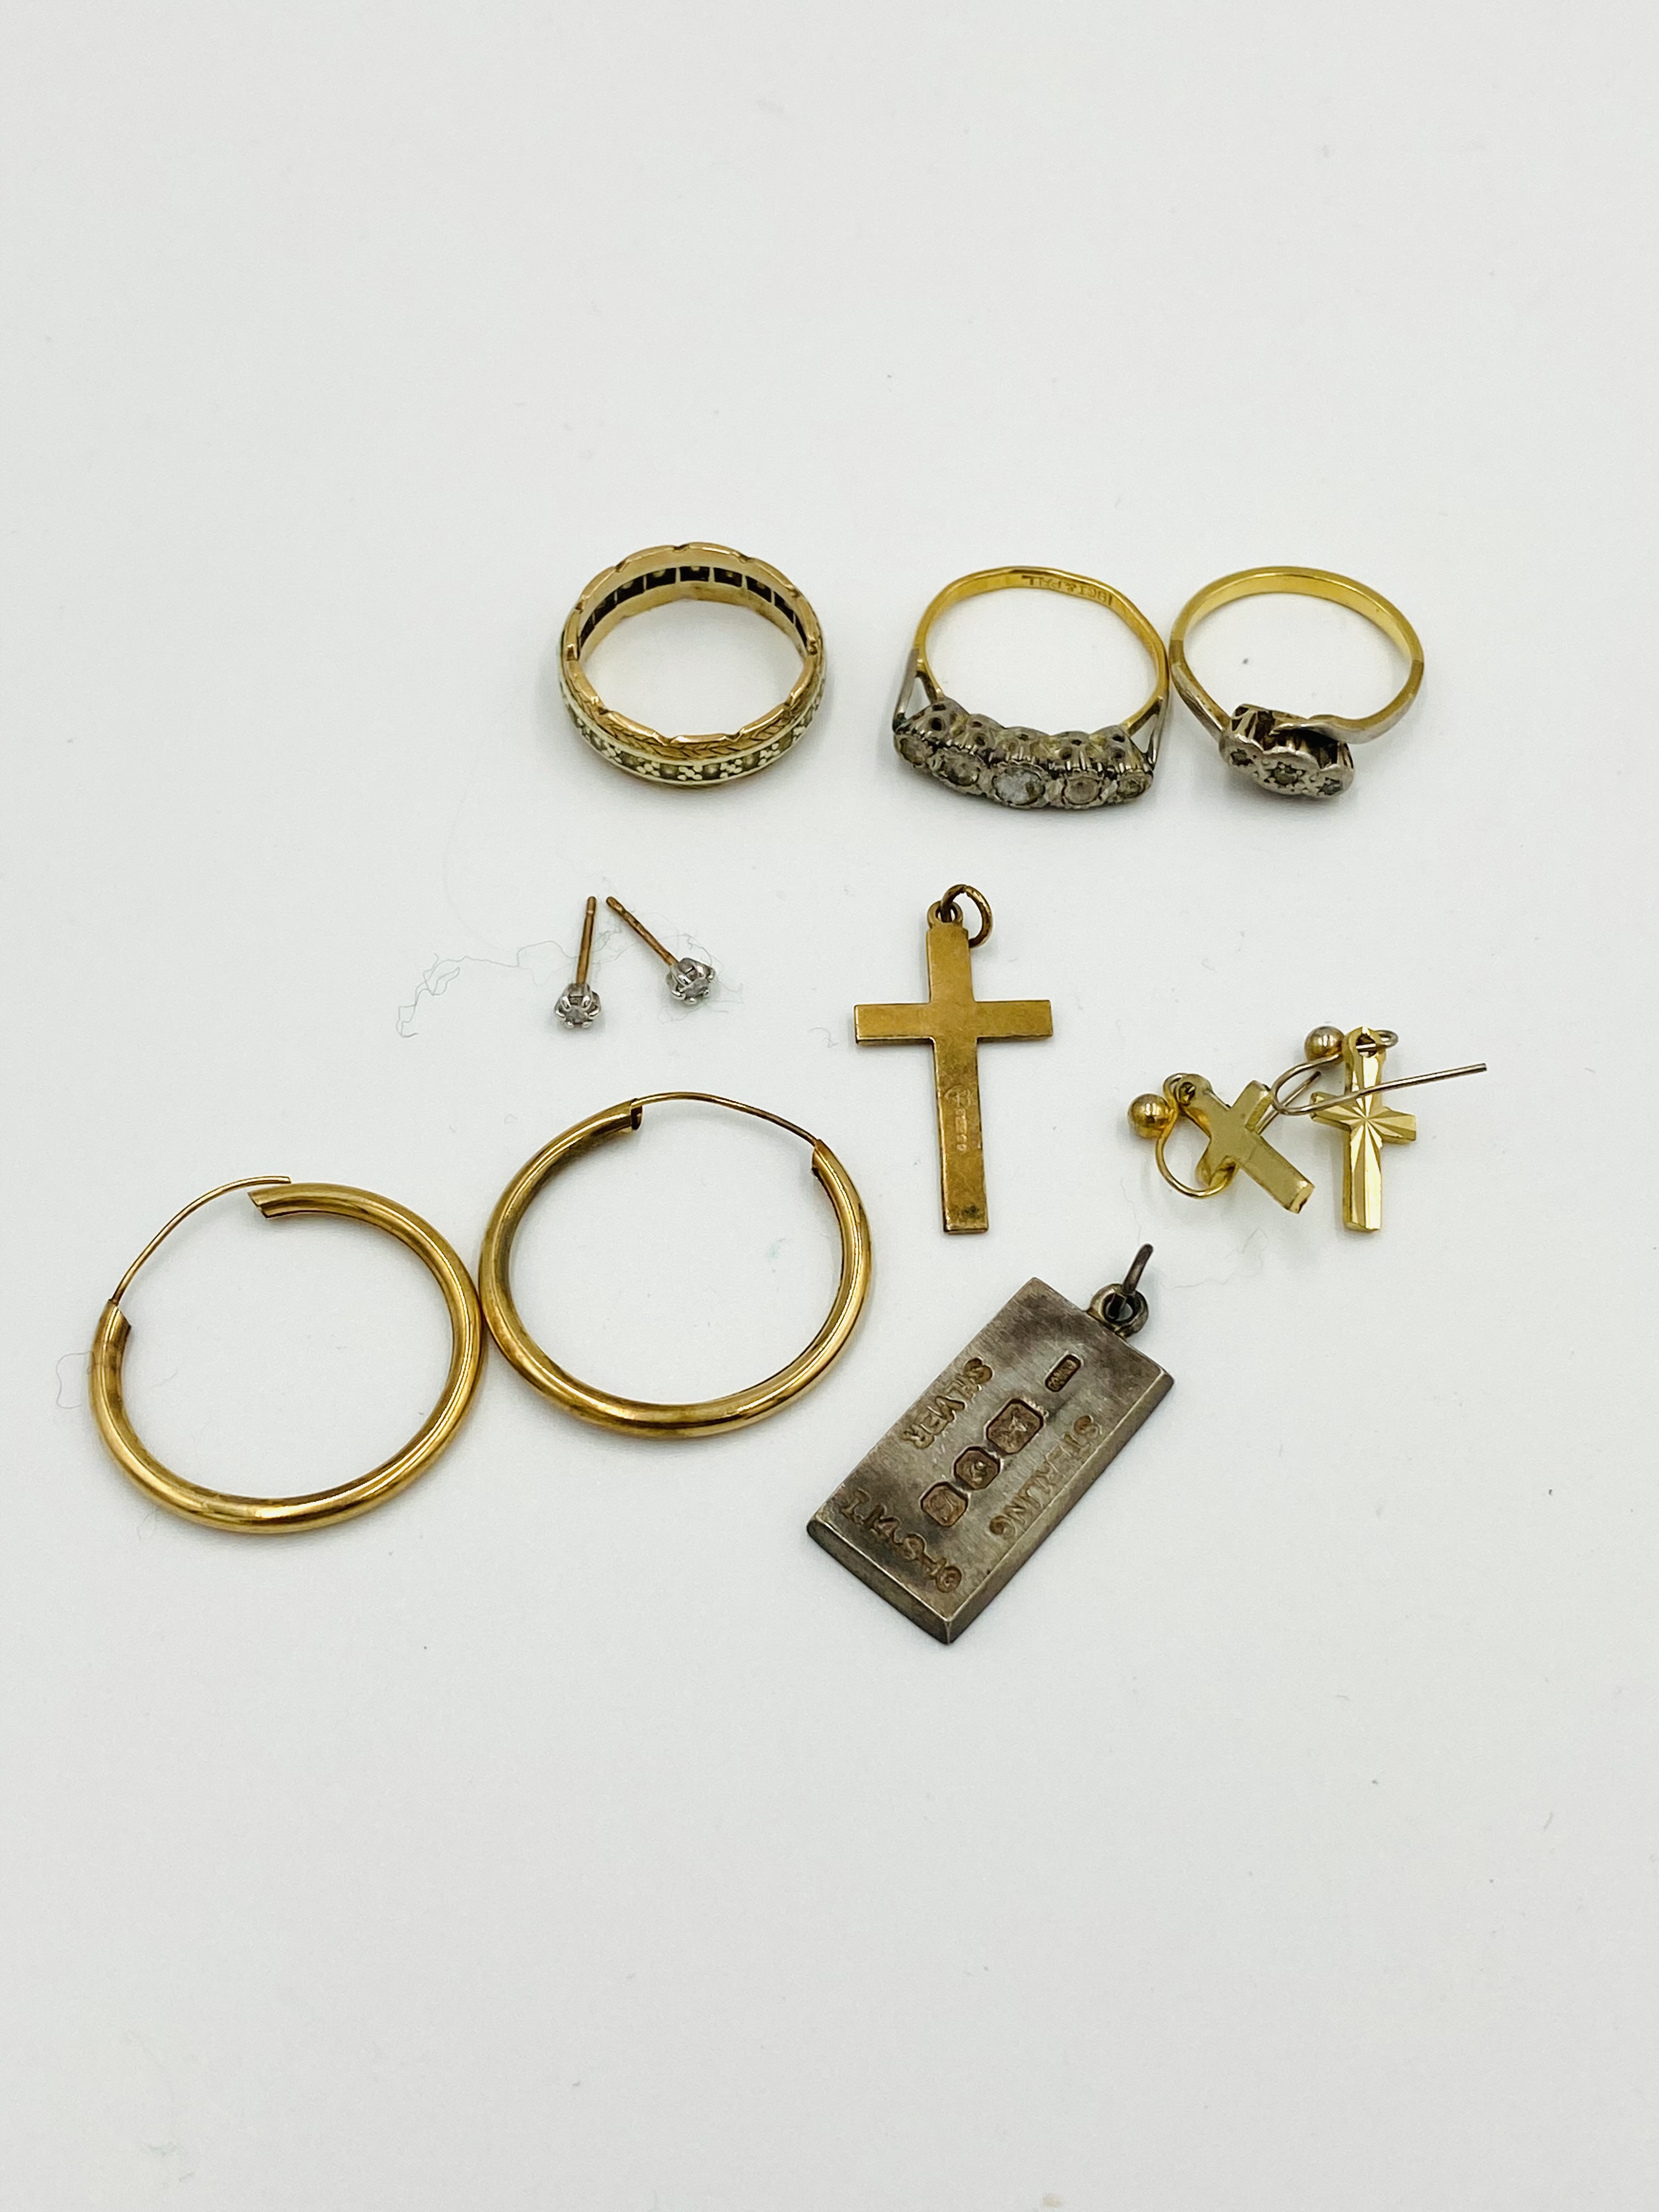 18ct gold ring together with other gold and silver jewellery - Image 3 of 4